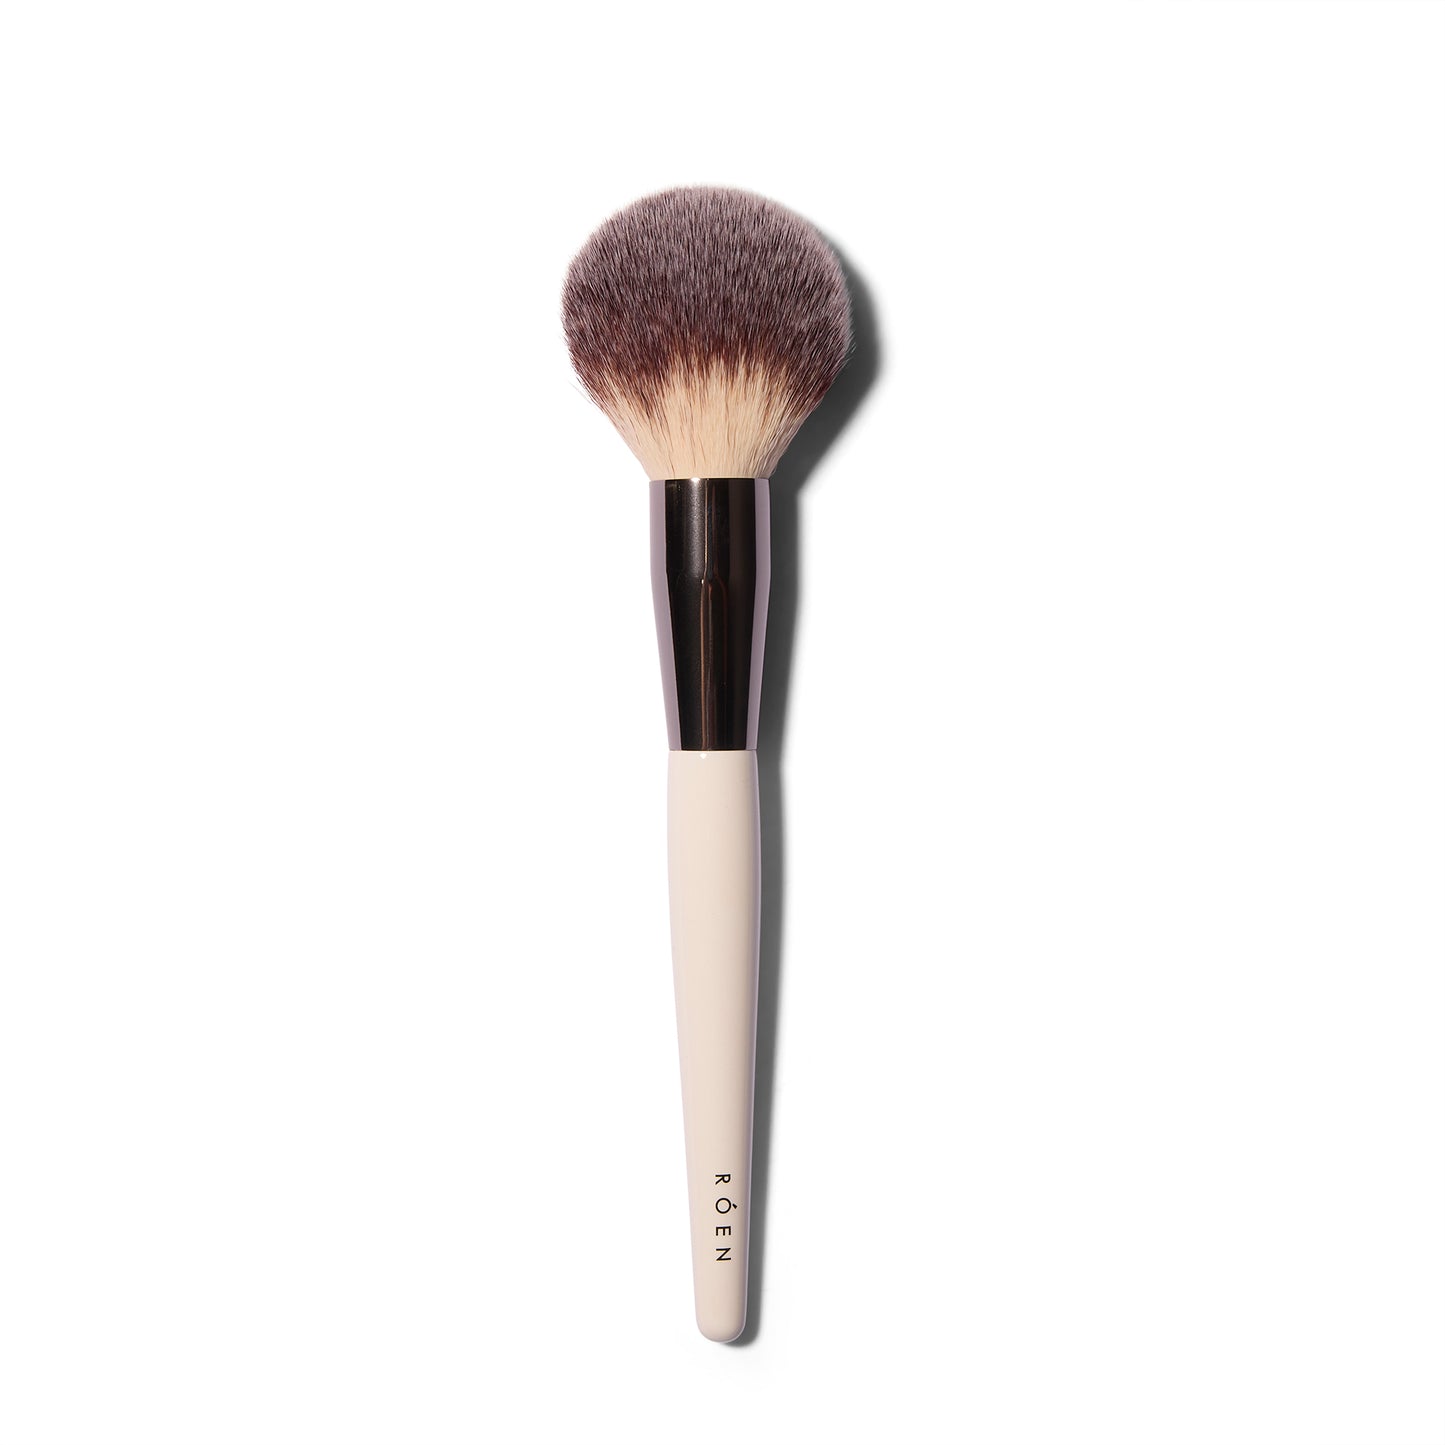 The large, fluffy Roen Everything Powder synthetic powder brush with a domed shape.